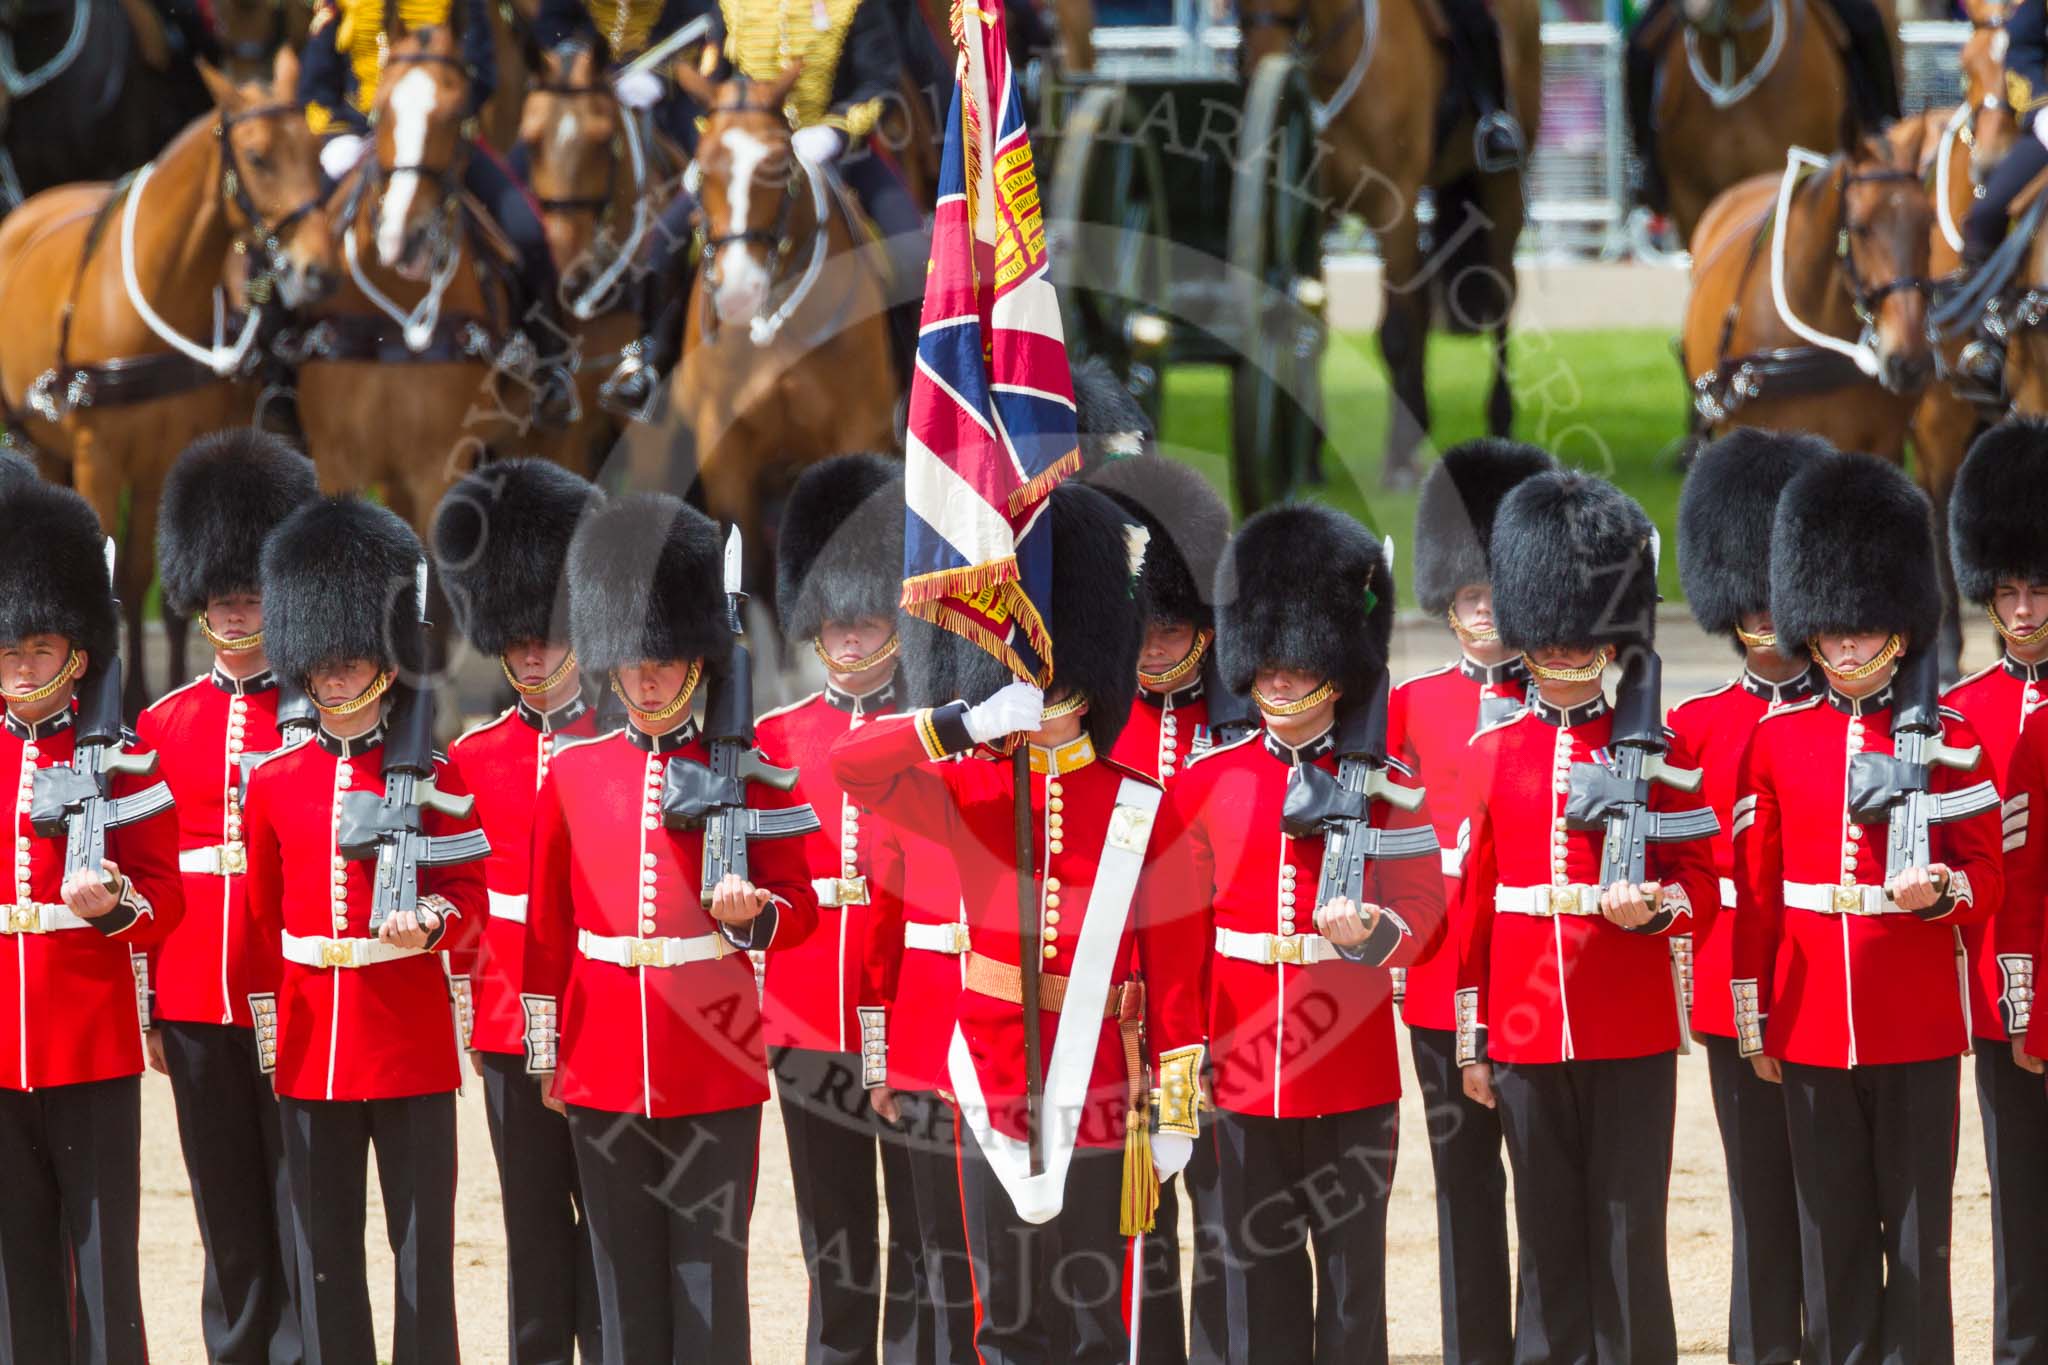 The Colonel's Review 2015.
Horse Guards Parade, Westminster,
London,

United Kingdom,
on 06 June 2015 at 11:26, image #338